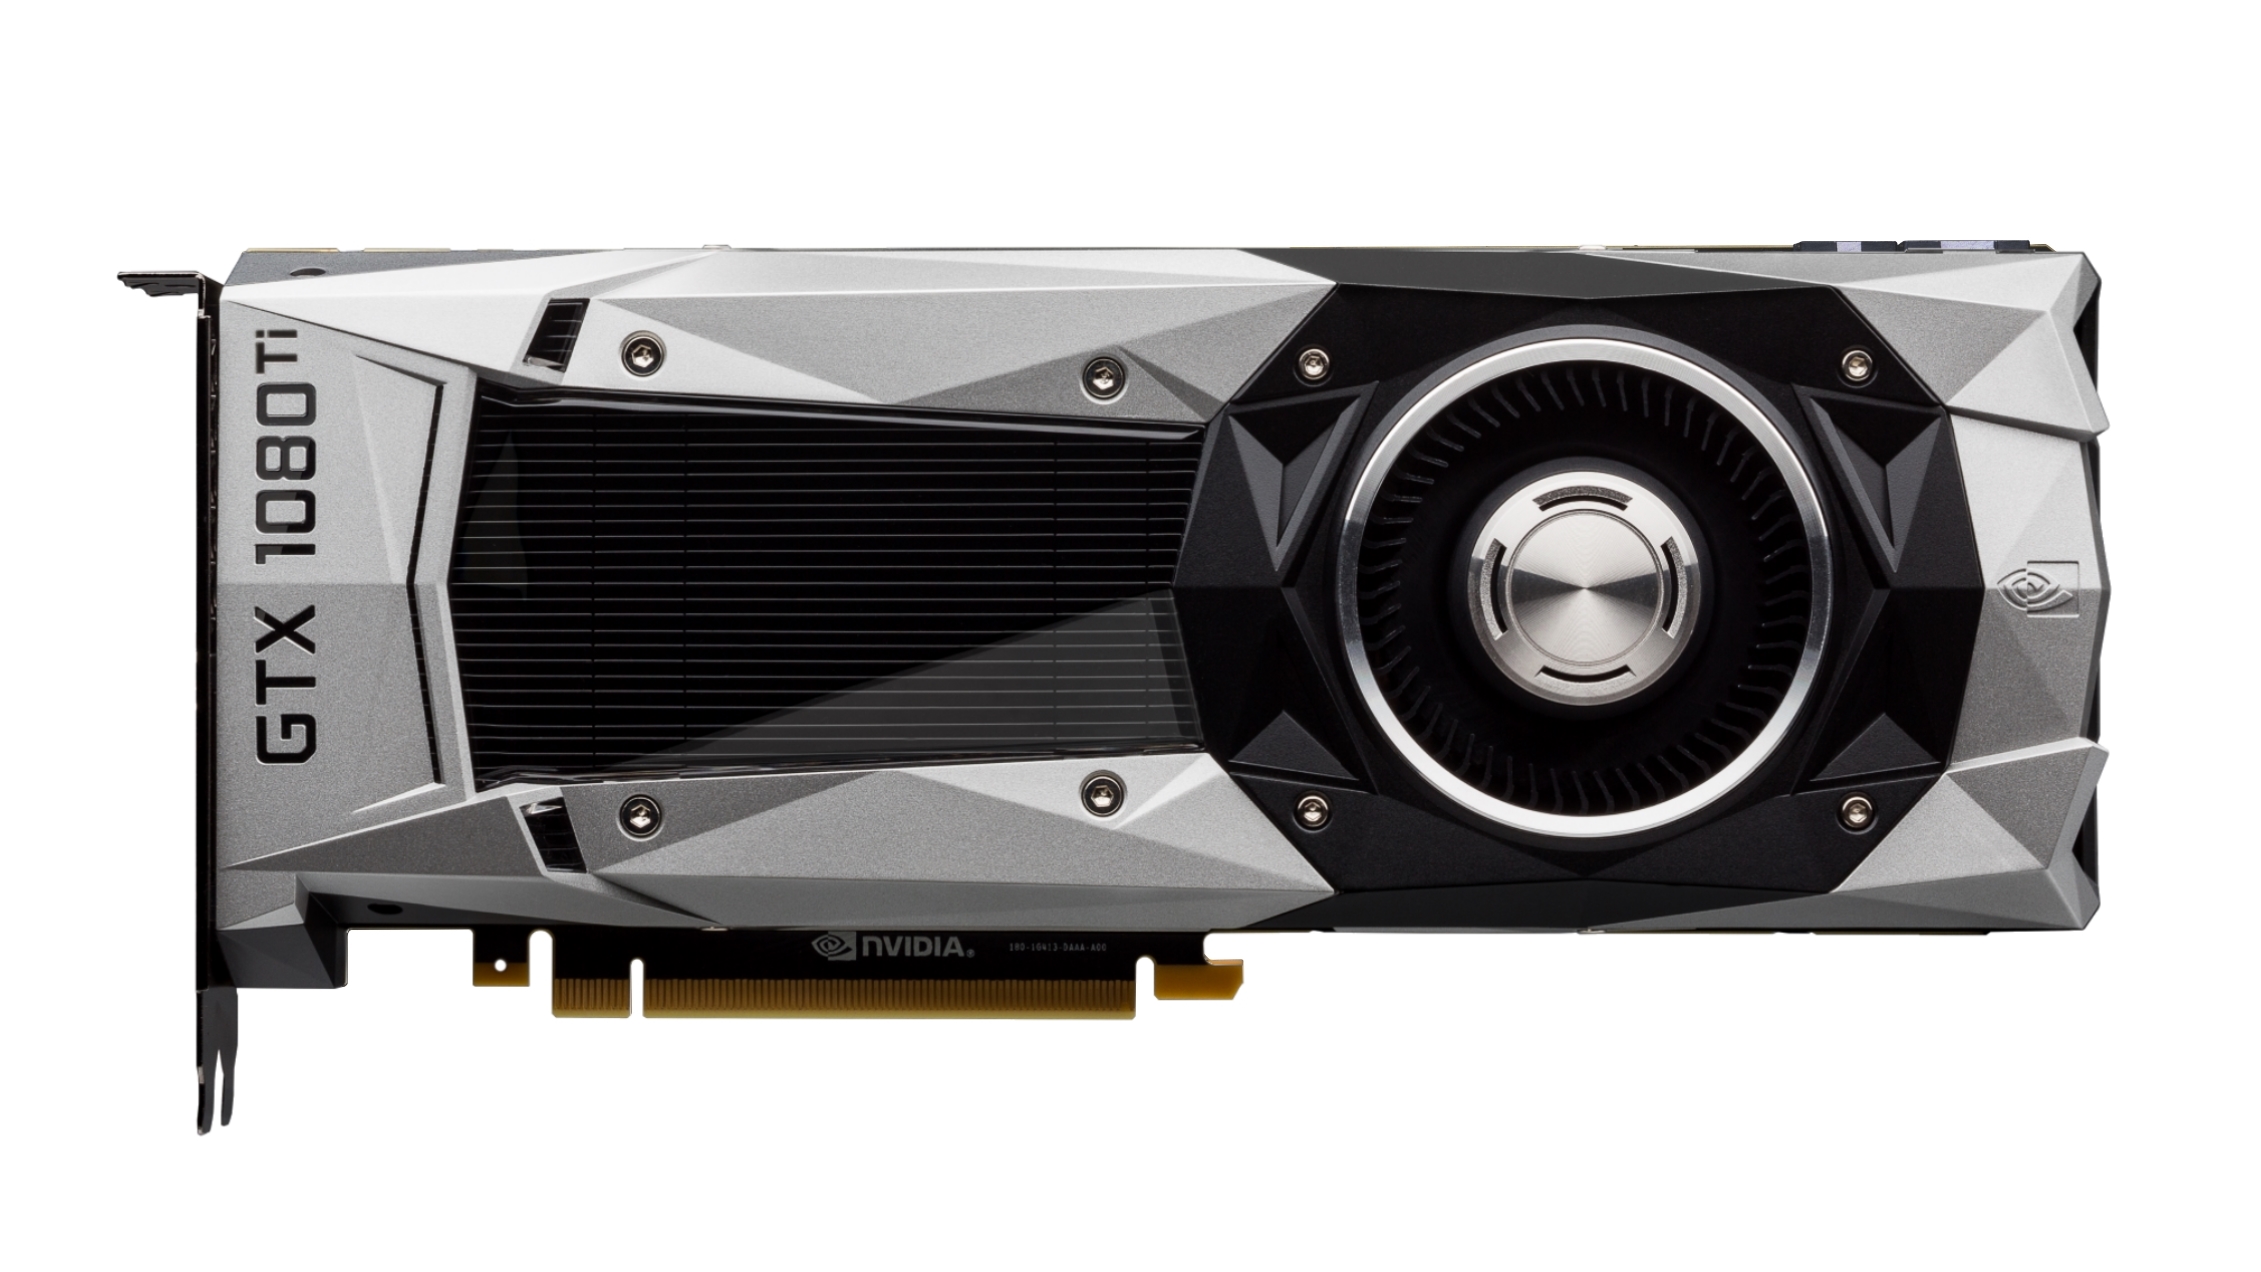 Trække ud Dempsey Vedholdende Nvidia GTX 1080 Ti review: the numbers are in. Hail to the 4K king |  PCGamesN